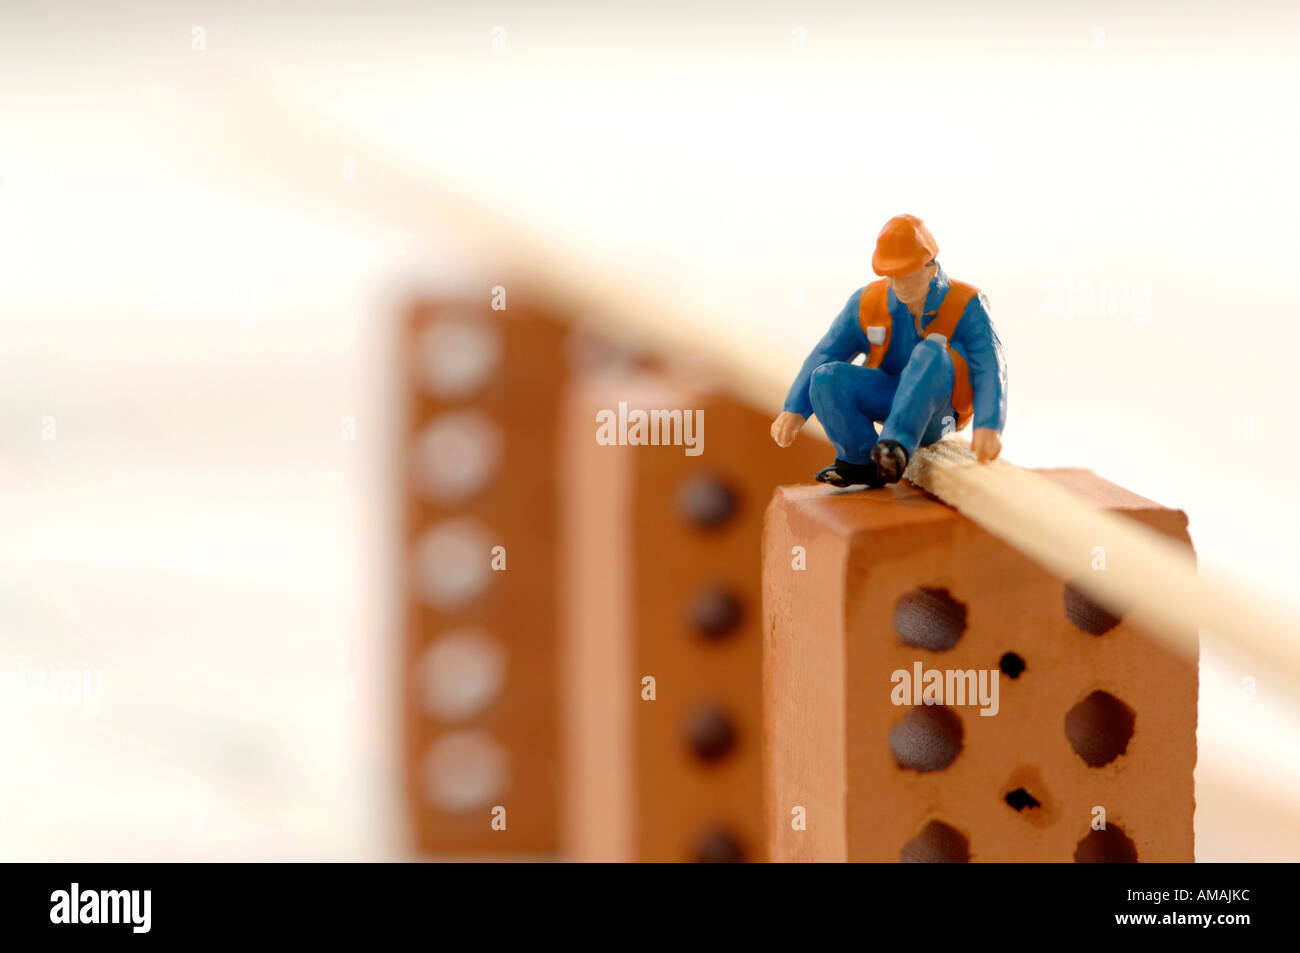 Figurine of construction worker Stock Photo